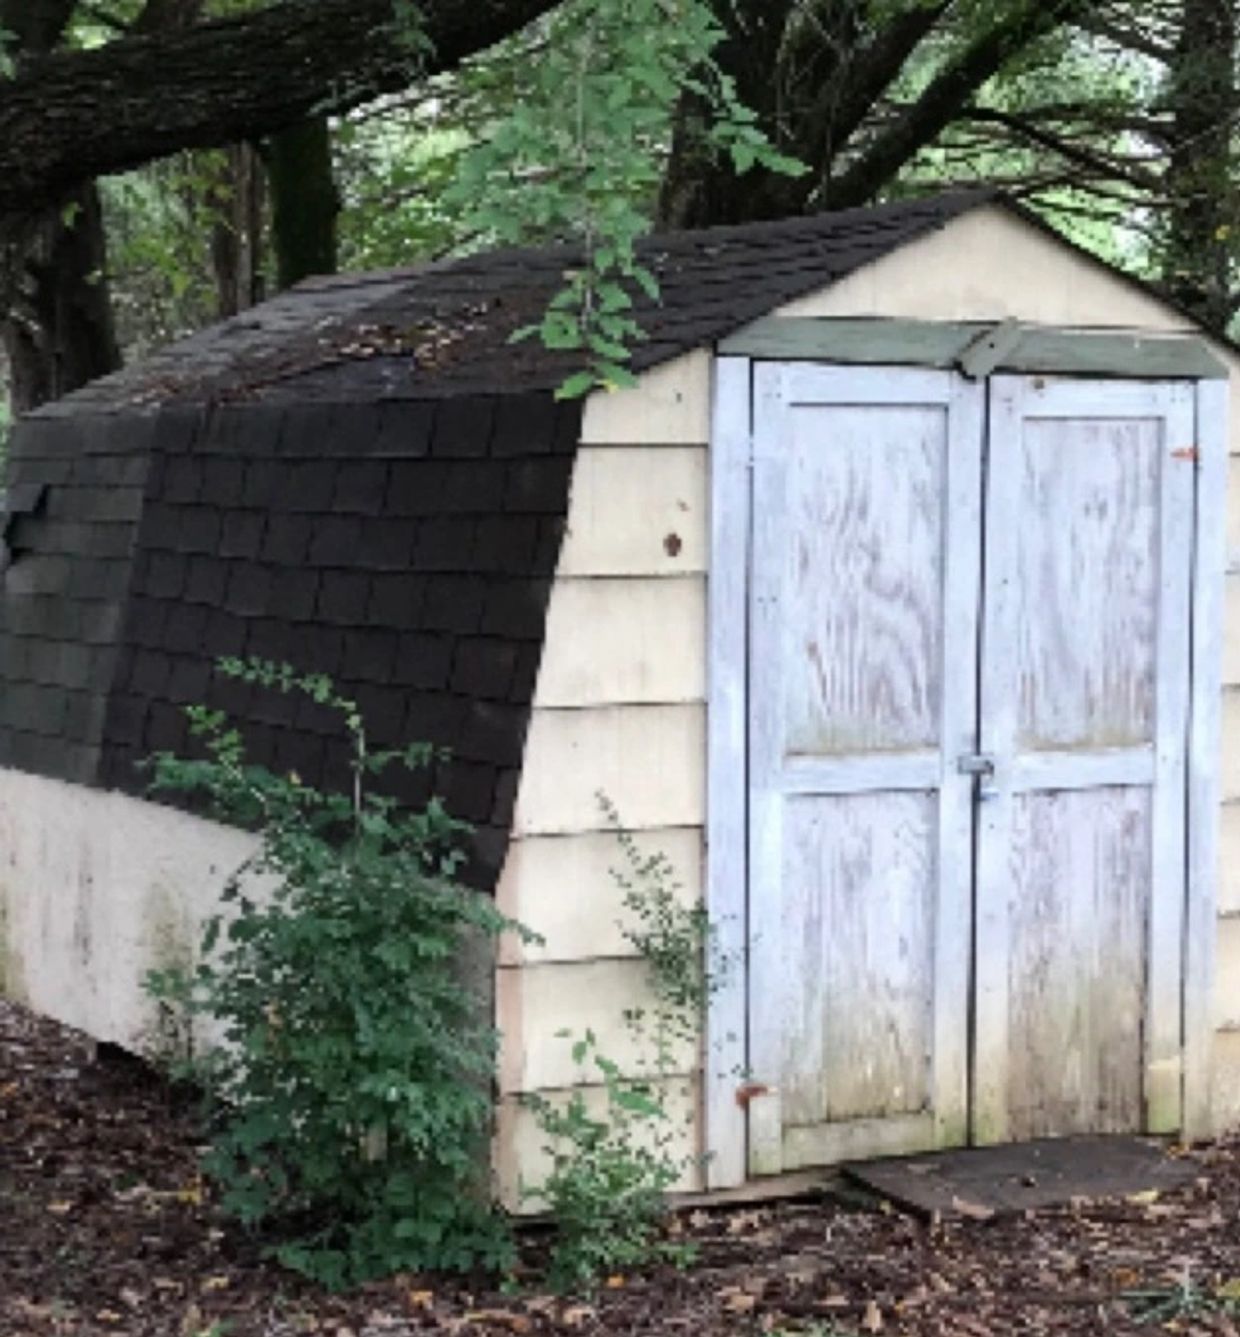 Shed teardown near me, shed demolition and removal harford county, shed demolition baltimore county